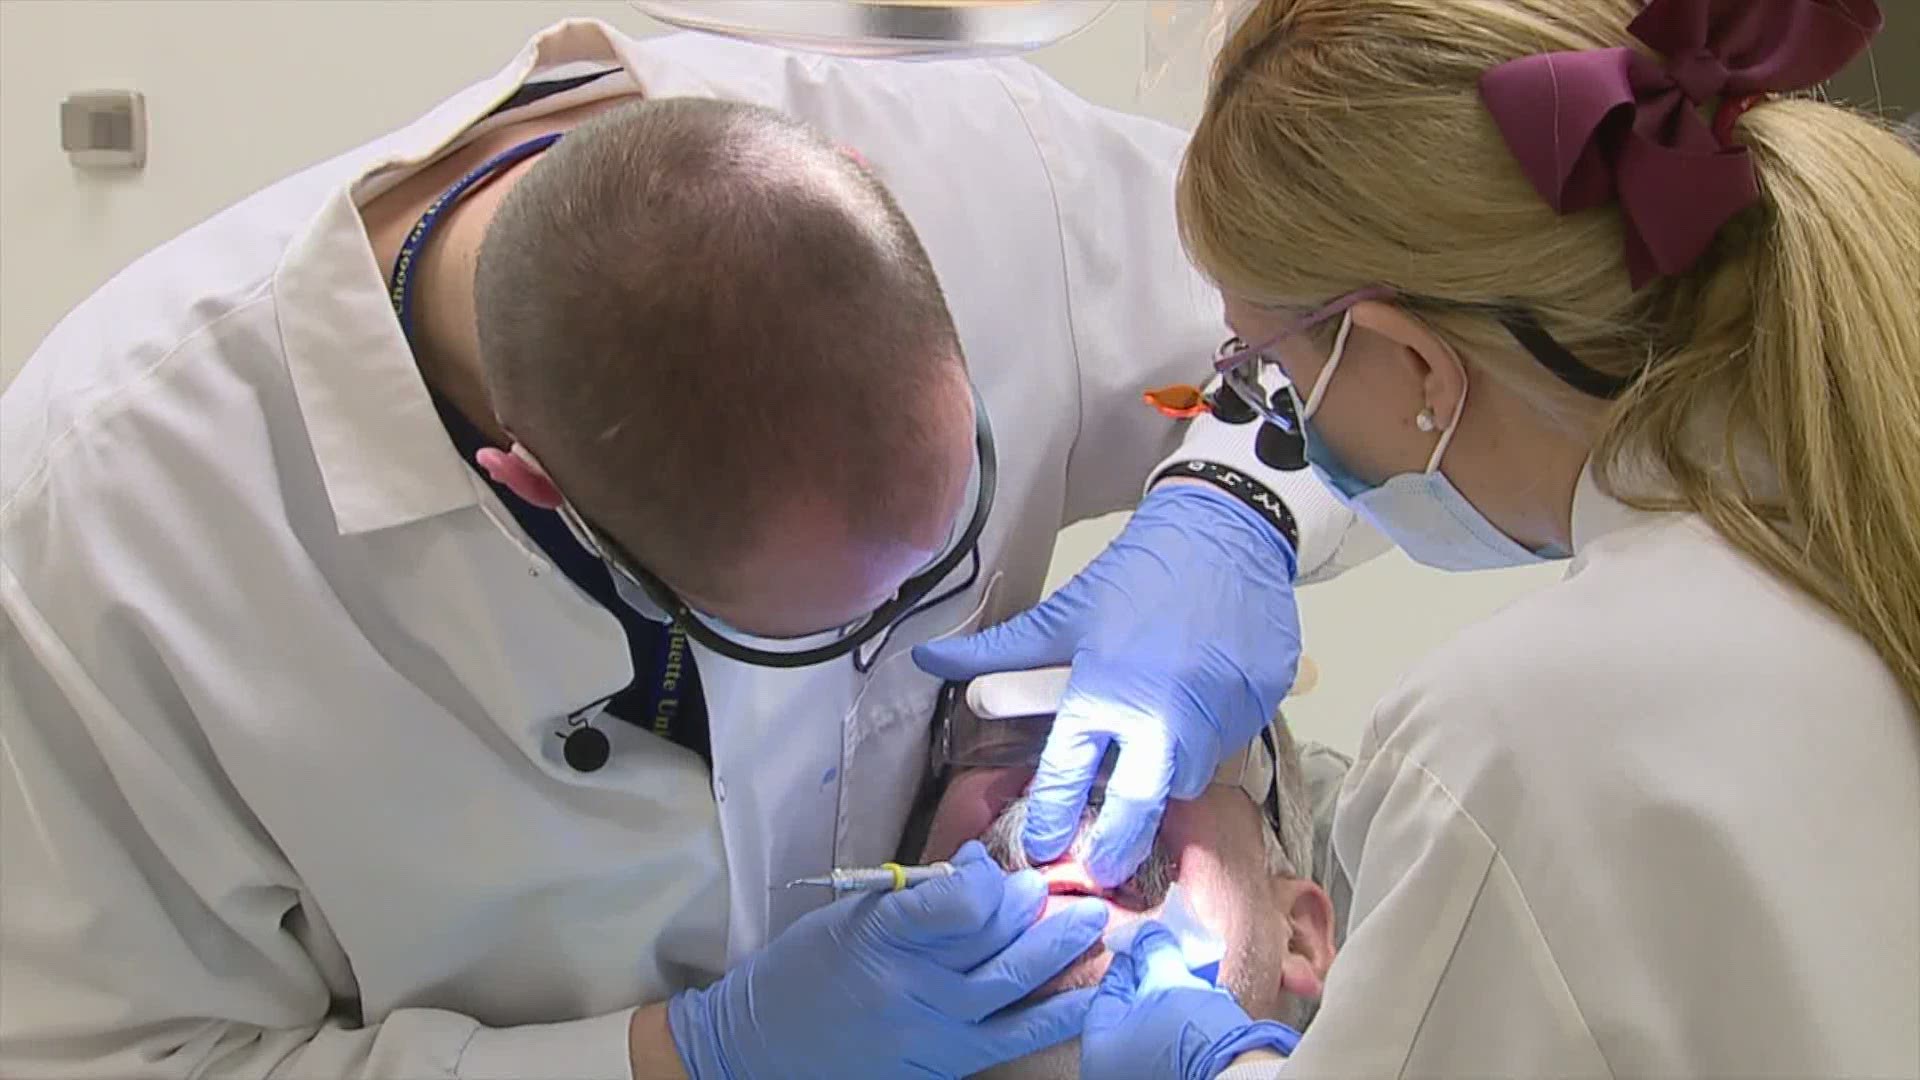 There are concerns as dentist offices reopen on how to keep staff safe. We brought them to the governor and interviewed a local dentist to see what plan is in place.